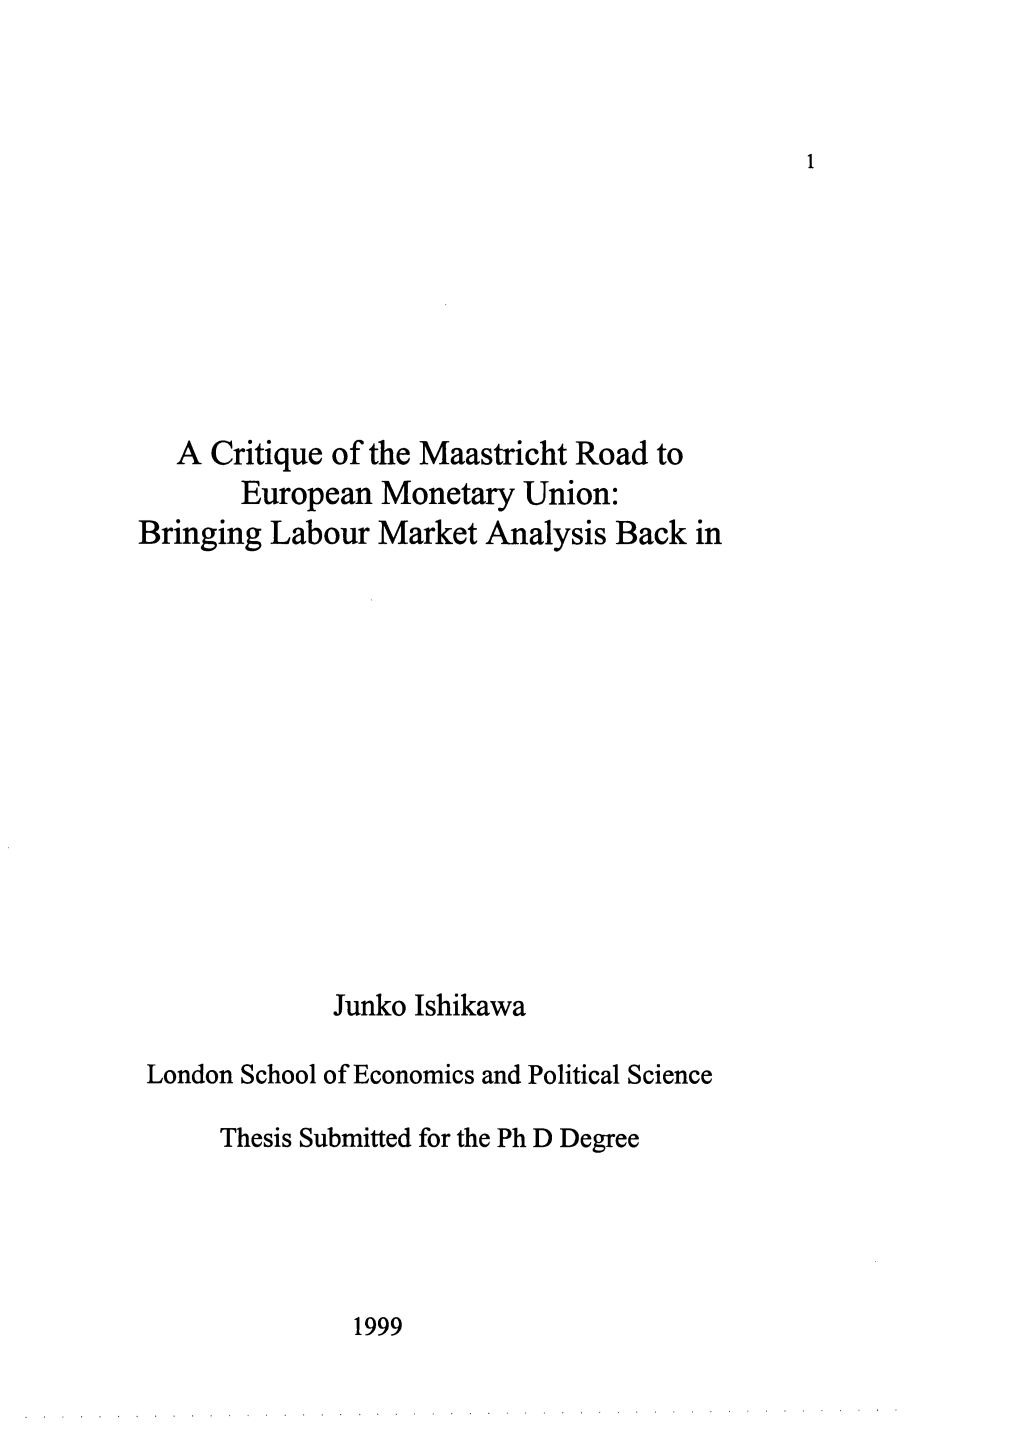 A Critique of the Maastricht Road to European Monetary Union: Bringing Labour Market Analysis Back In